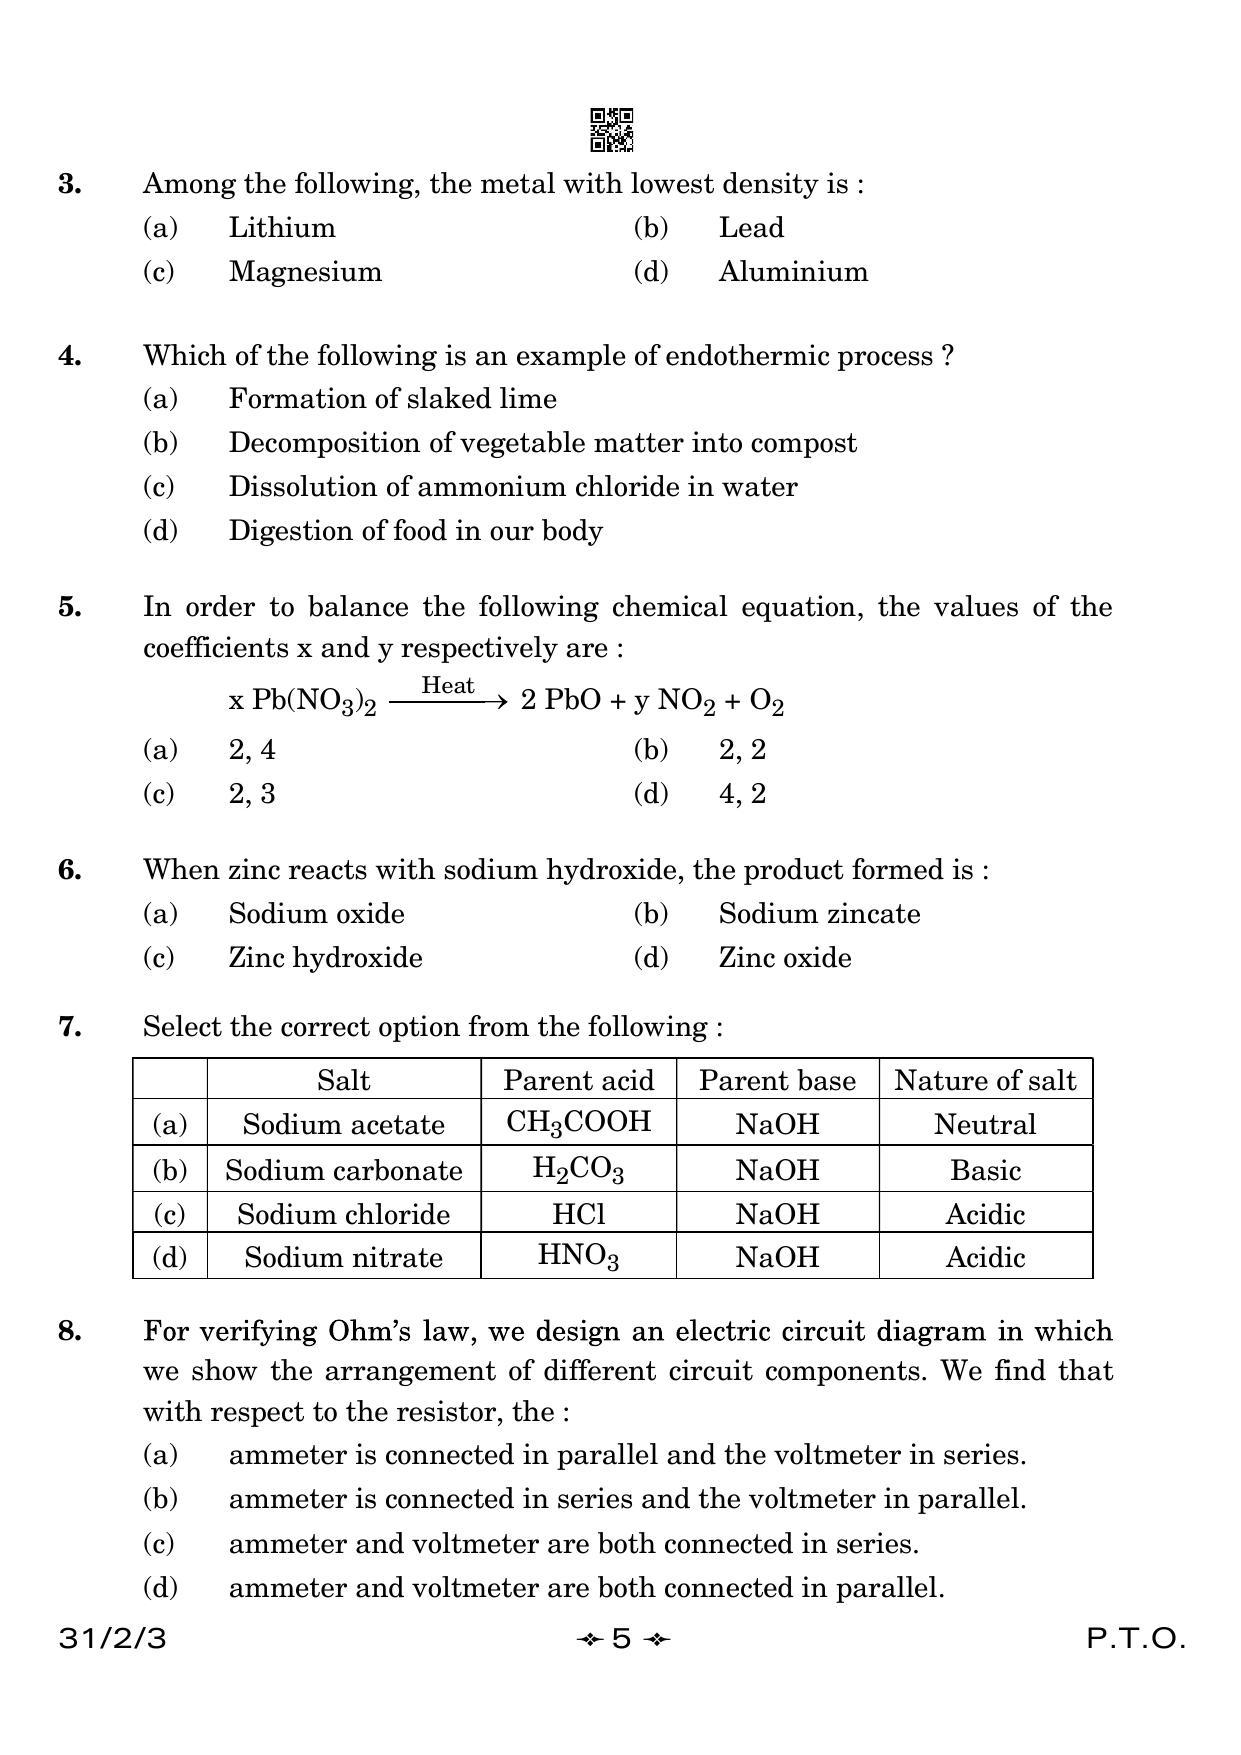 CBSE Class 10 31-2-3 Science 2023 Question Paper - Page 5